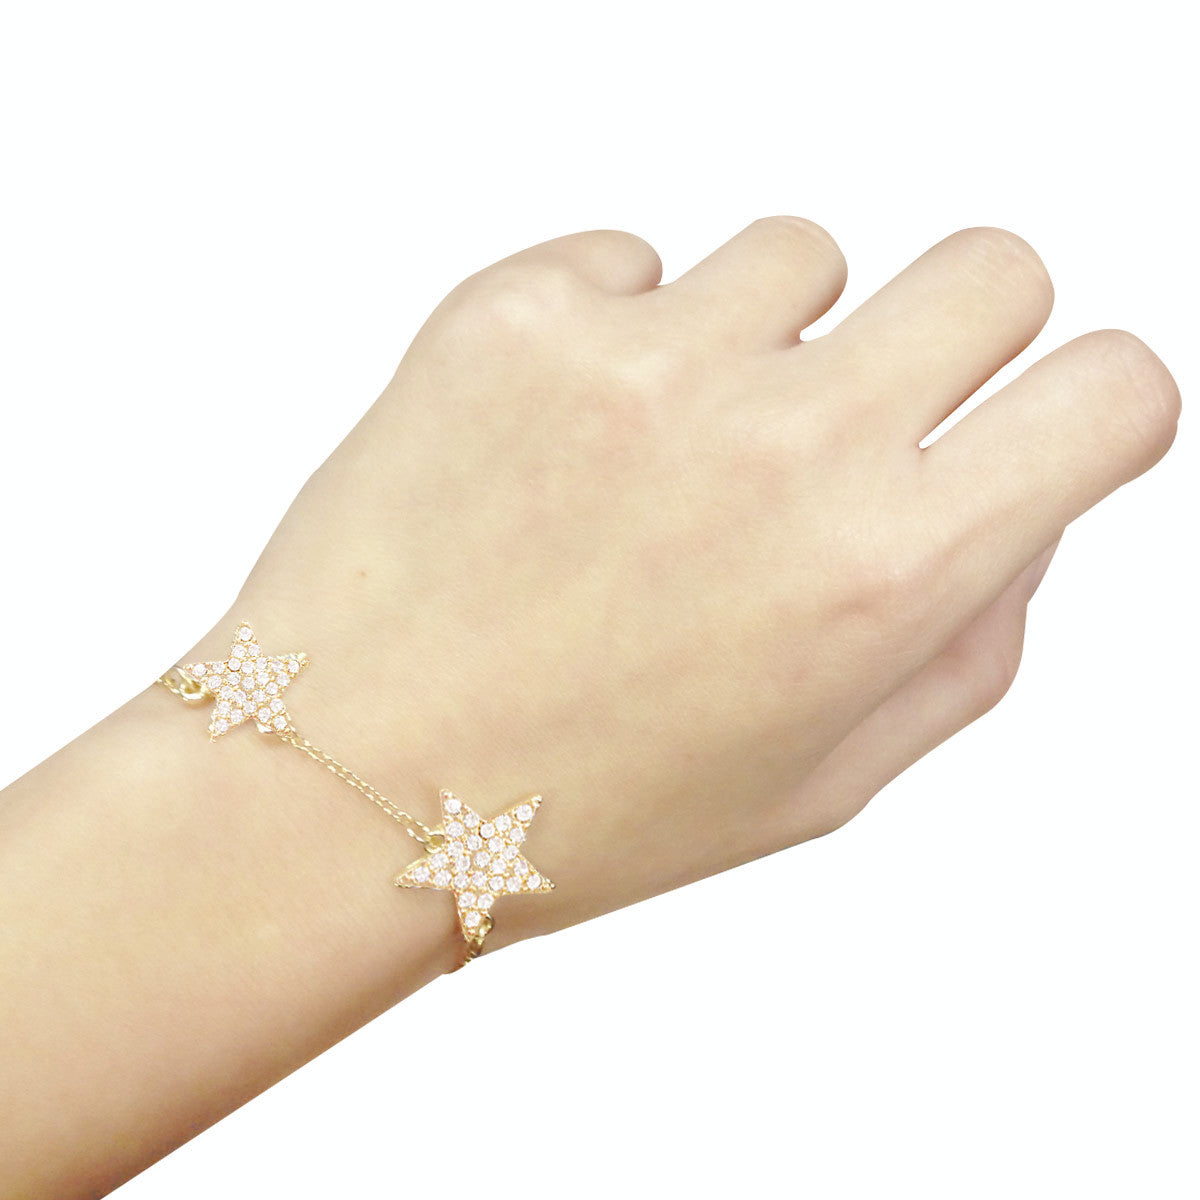 Wrapables Gold Plated Petite Double Crystal Star Bracelet